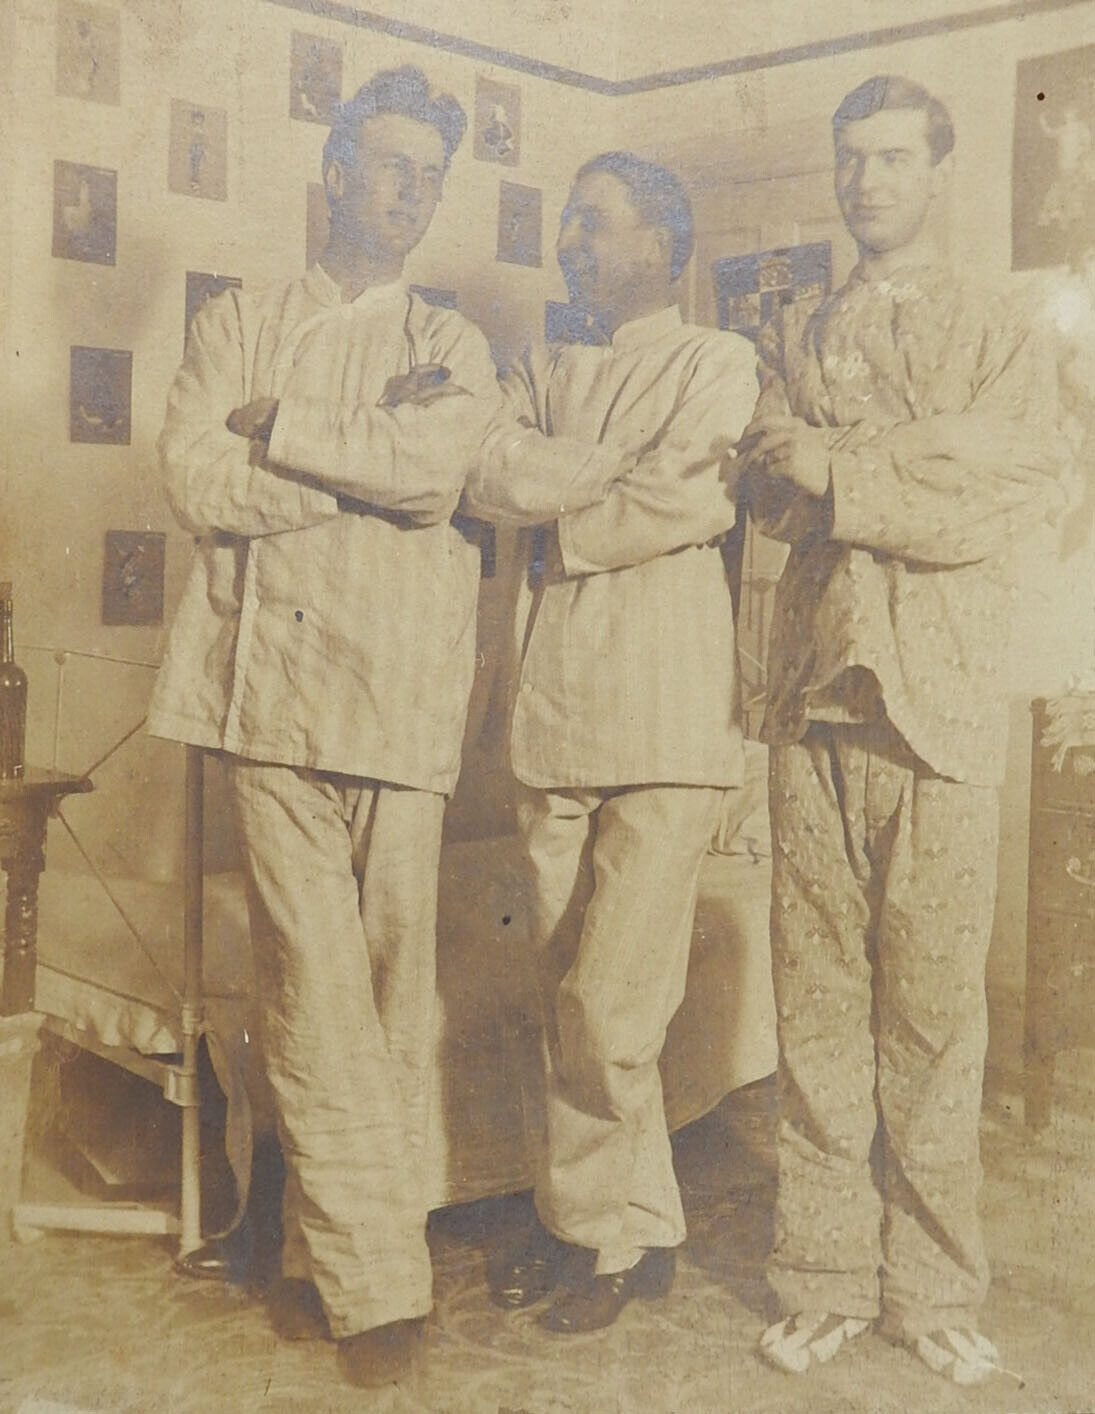 Antique Vintage Photograph Pajama Boys Silly Guys in PJs Pinups